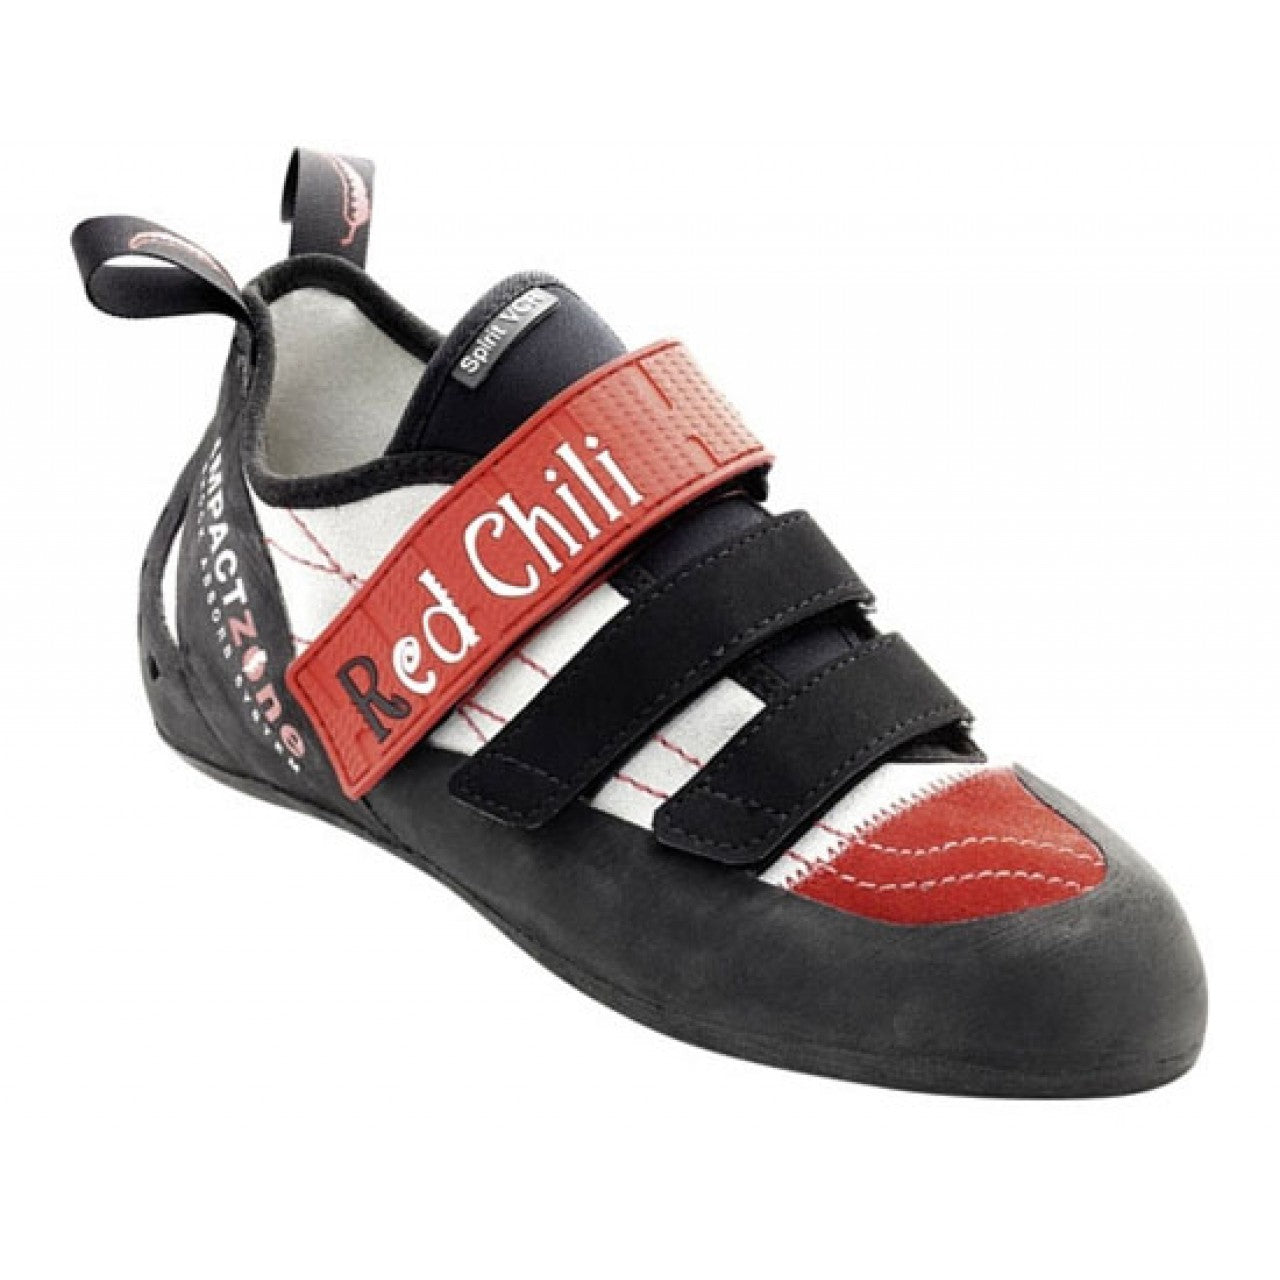 Red Chili Voltage Review – Climbing Gear Reviews